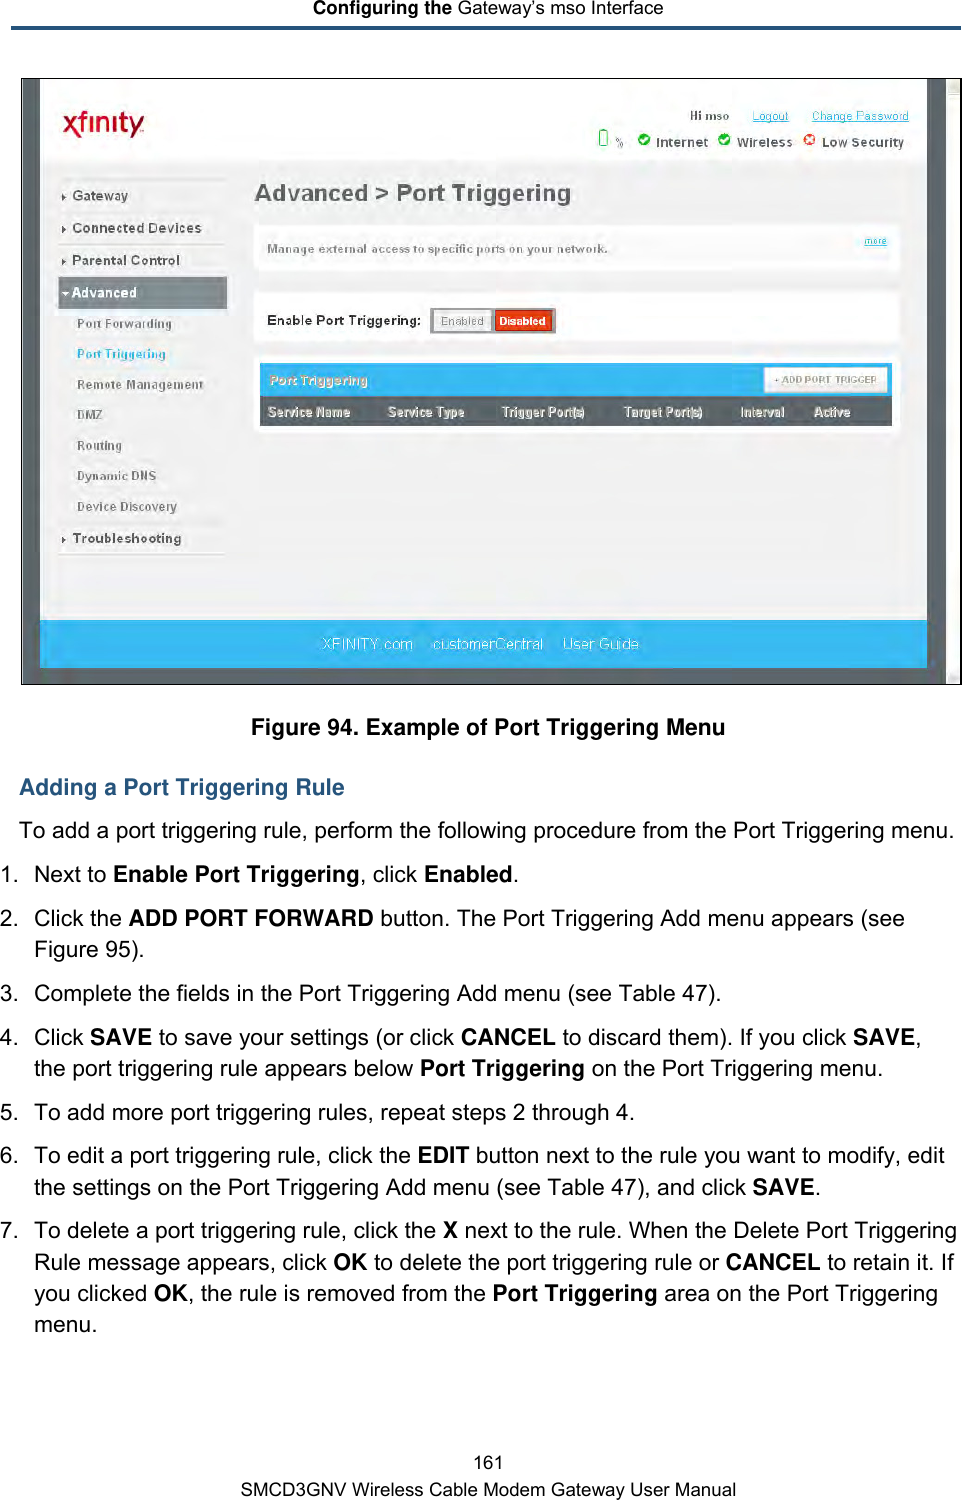 Configuring the Gateway’s mso Interface 161 SMCD3GNV Wireless Cable Modem Gateway User Manual  Figure 94. Example of Port Triggering Menu Adding a Port Triggering Rule To add a port triggering rule, perform the following procedure from the Port Triggering menu. 1. Next to Enable Port Triggering, click Enabled. 2. Click the ADD PORT FORWARD button. The Port Triggering Add menu appears (see Figure 95). 3. Complete the fields in the Port Triggering Add menu (see Table 47). 4. Click SAVE to save your settings (or click CANCEL to discard them). If you click SAVE, the port triggering rule appears below Port Triggering on the Port Triggering menu. 5. To add more port triggering rules, repeat steps 2 through 4. 6. To edit a port triggering rule, click the EDIT button next to the rule you want to modify, edit the settings on the Port Triggering Add menu (see Table 47), and click SAVE. 7. To delete a port triggering rule, click the X next to the rule. When the Delete Port Triggering Rule message appears, click OK to delete the port triggering rule or CANCEL to retain it. If you clicked OK, the rule is removed from the Port Triggering area on the Port Triggering menu. 